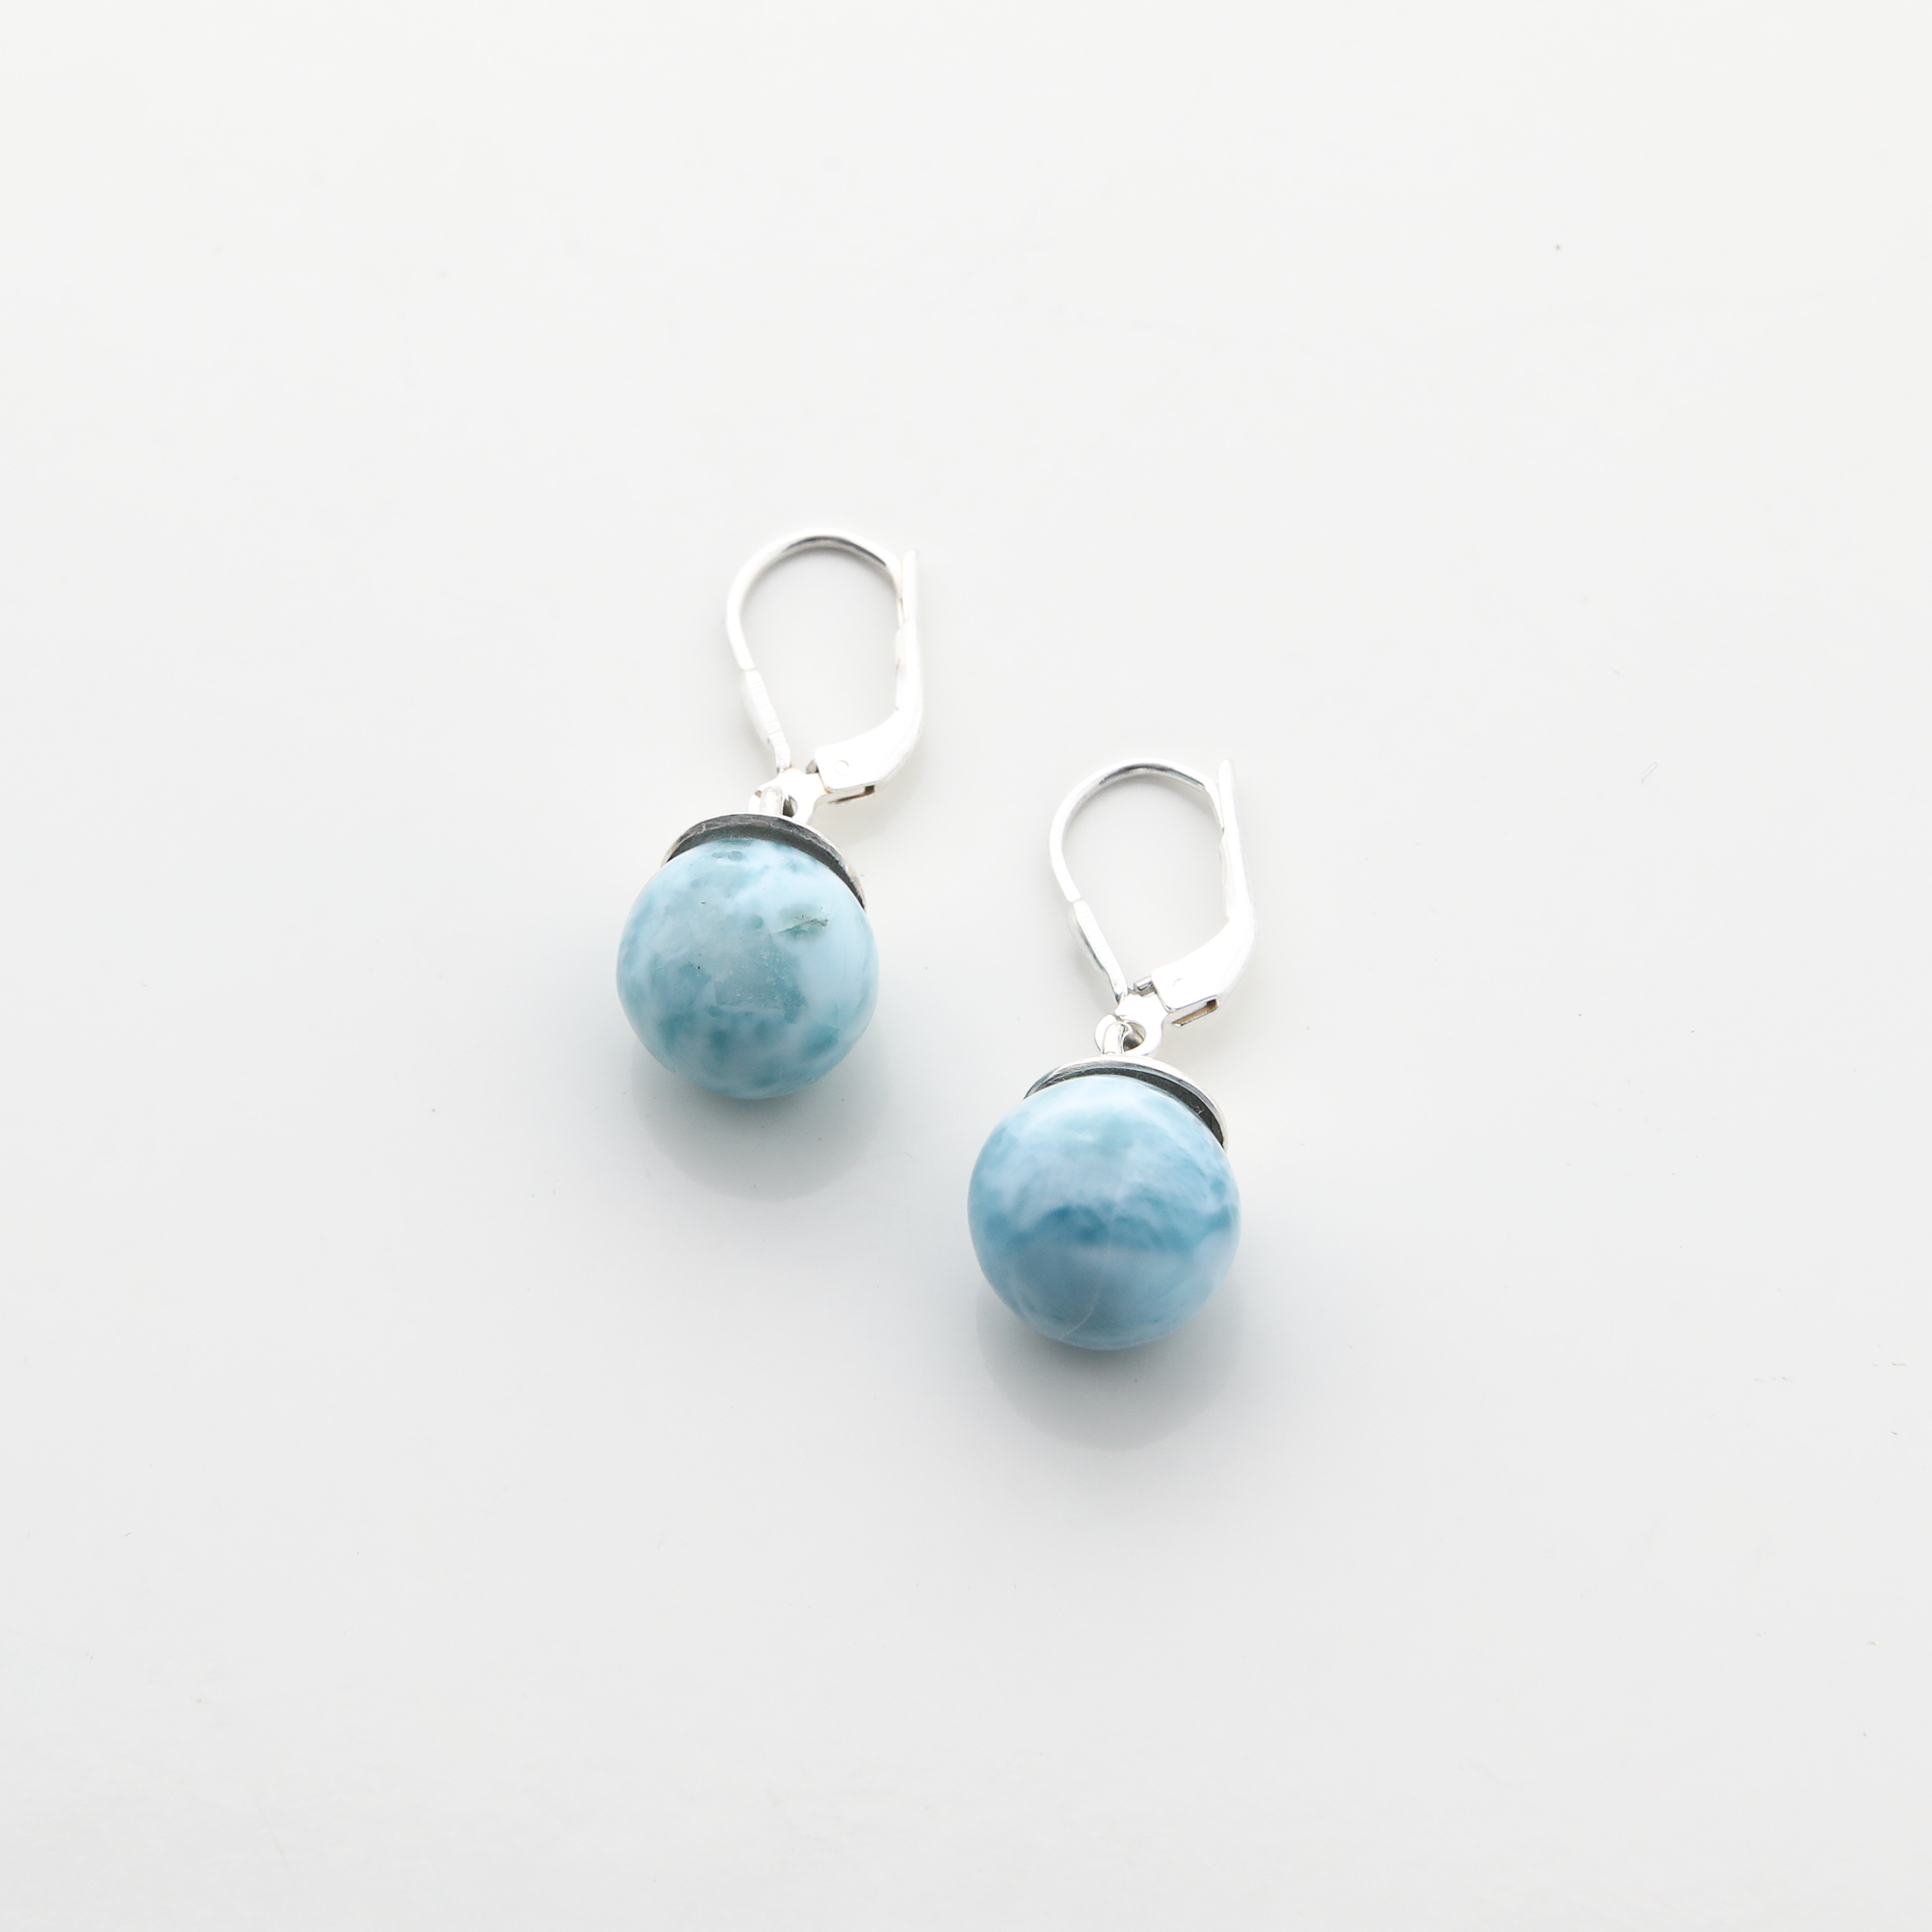 Stunning larimar round bead dangle earrings with silver hooks, perfect for any occasion. The light blue larimar stones are elegantly displayed, creating a unique and eye-catching accessory. Handcrafted with care, these earrings are a must-have addition to your jewelry collection.